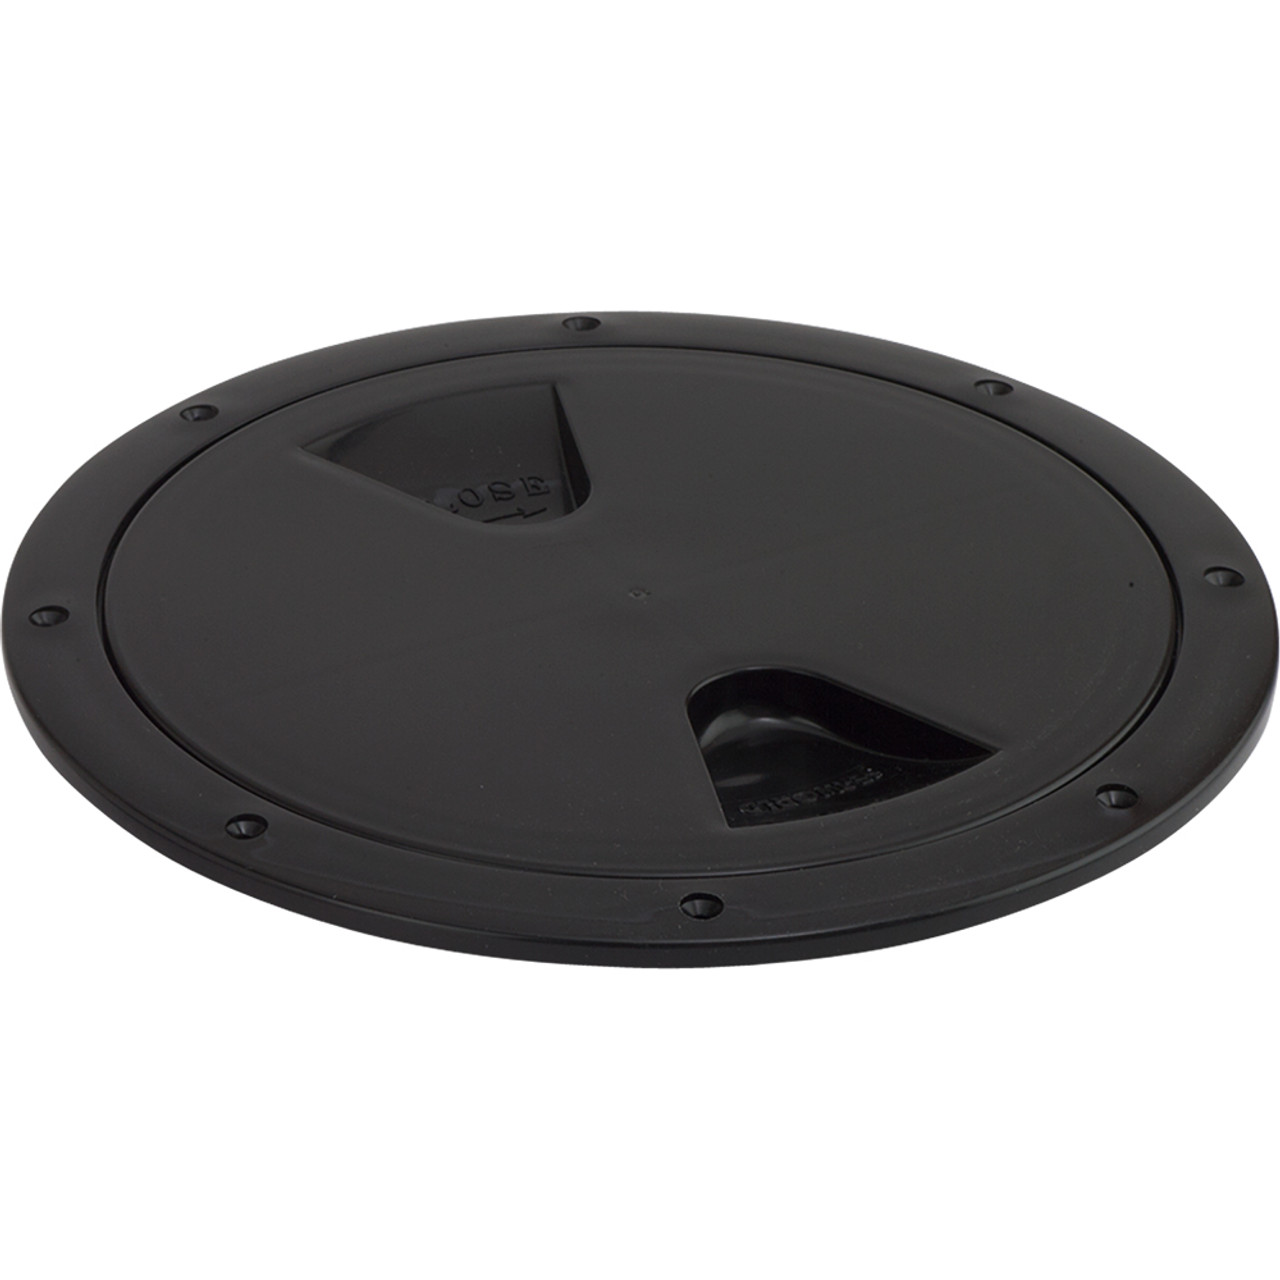 Sea-Dog Screw-Out Deck Plate - Black - 5" [335755-1]